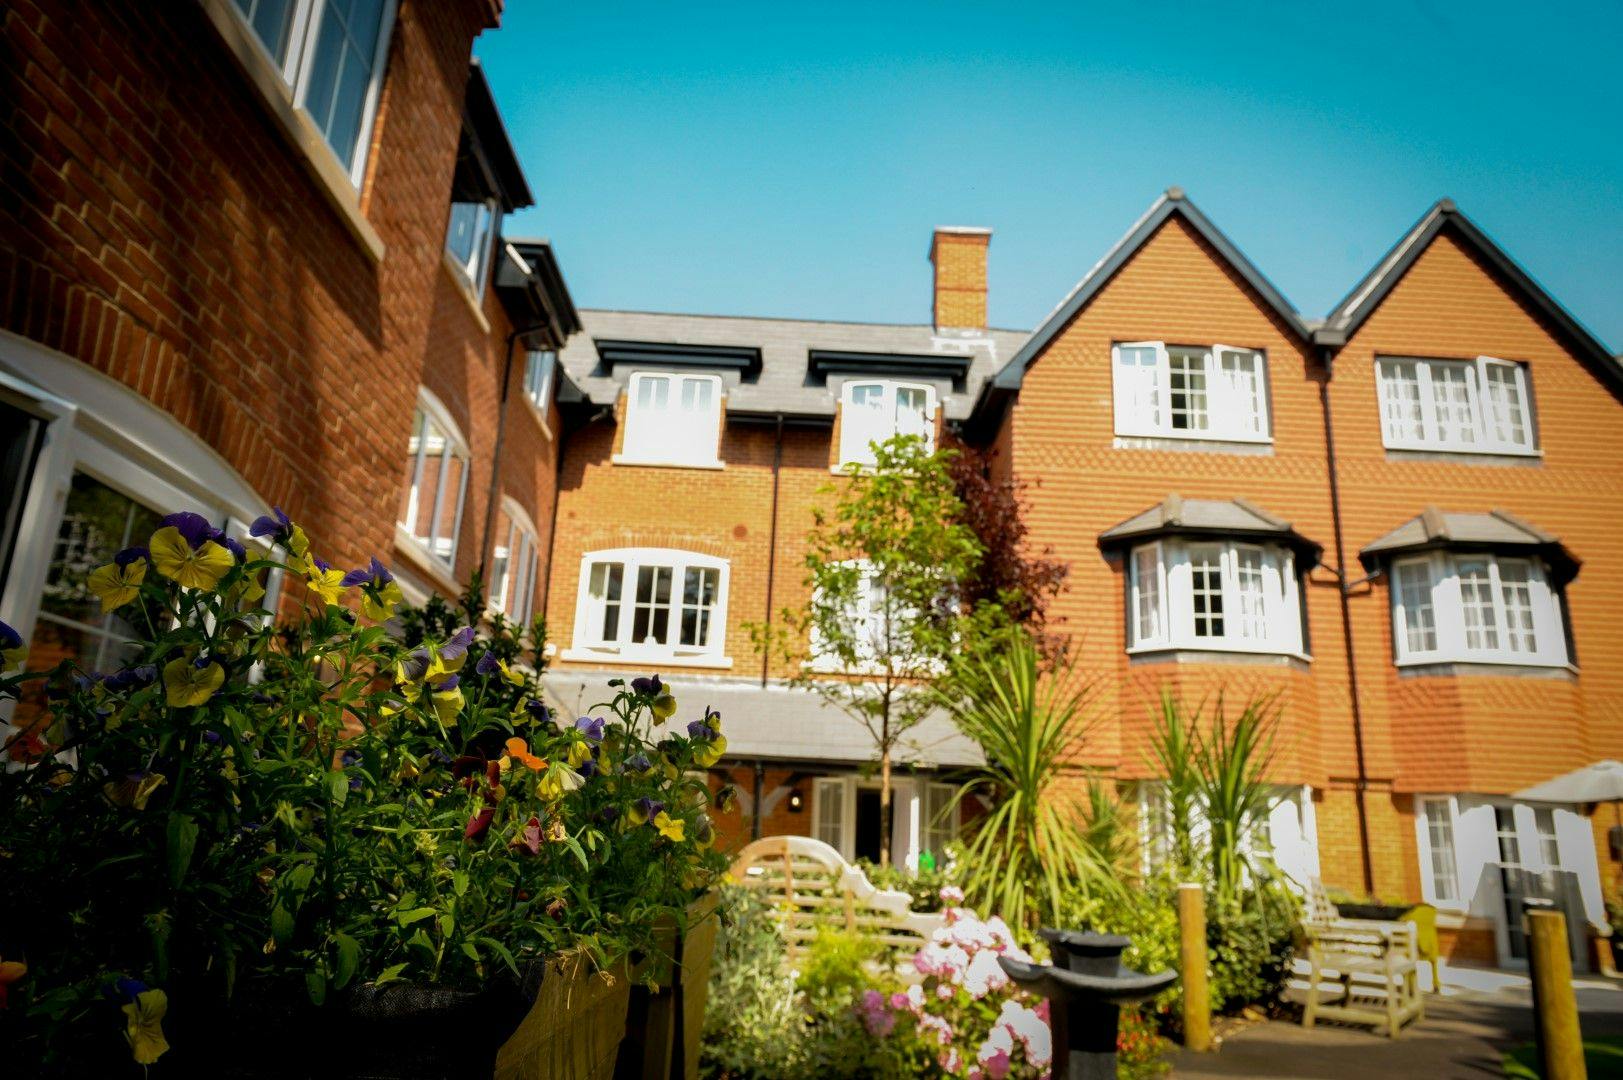 Exterior at Henley Manor Care Home in Henley-on-Thames, South Oxfordshire